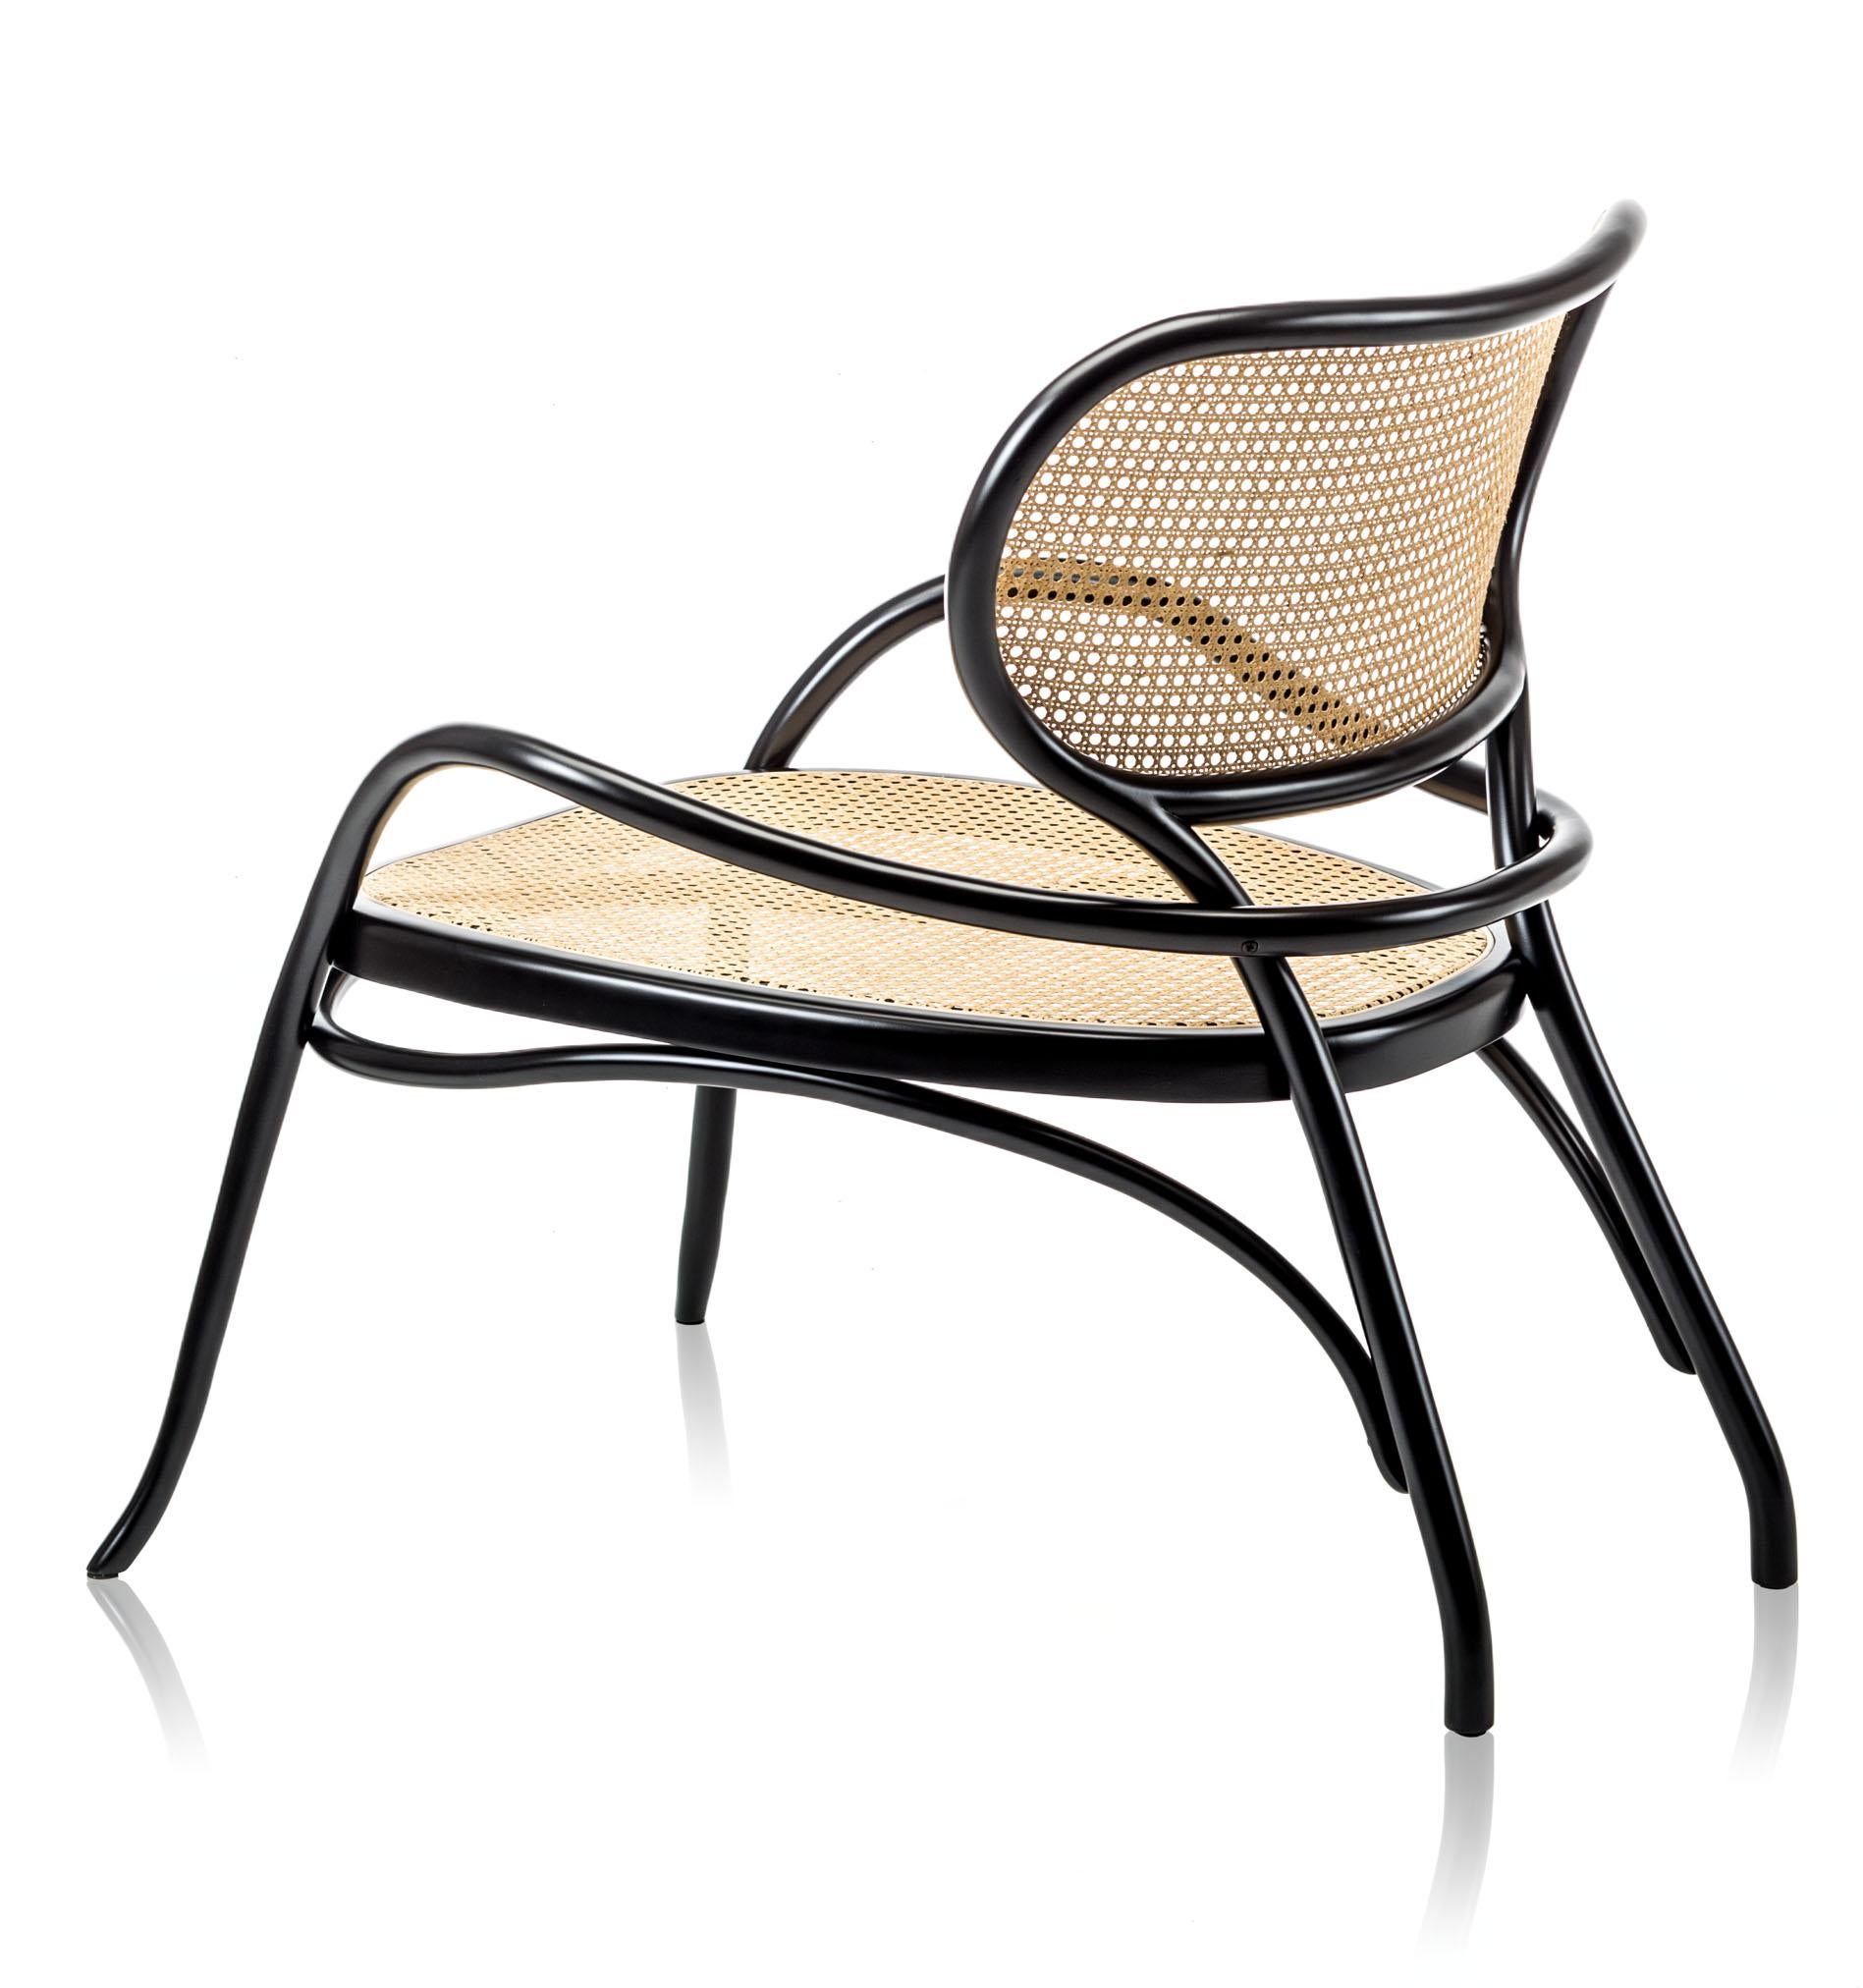 Nigel Coates has designed a sophisticated lounge chair with a complex design reflecting the stylistic features of the brand with refined skill. The seat and the comfortable backrest made of woven cane with a special large mesh version, are defined